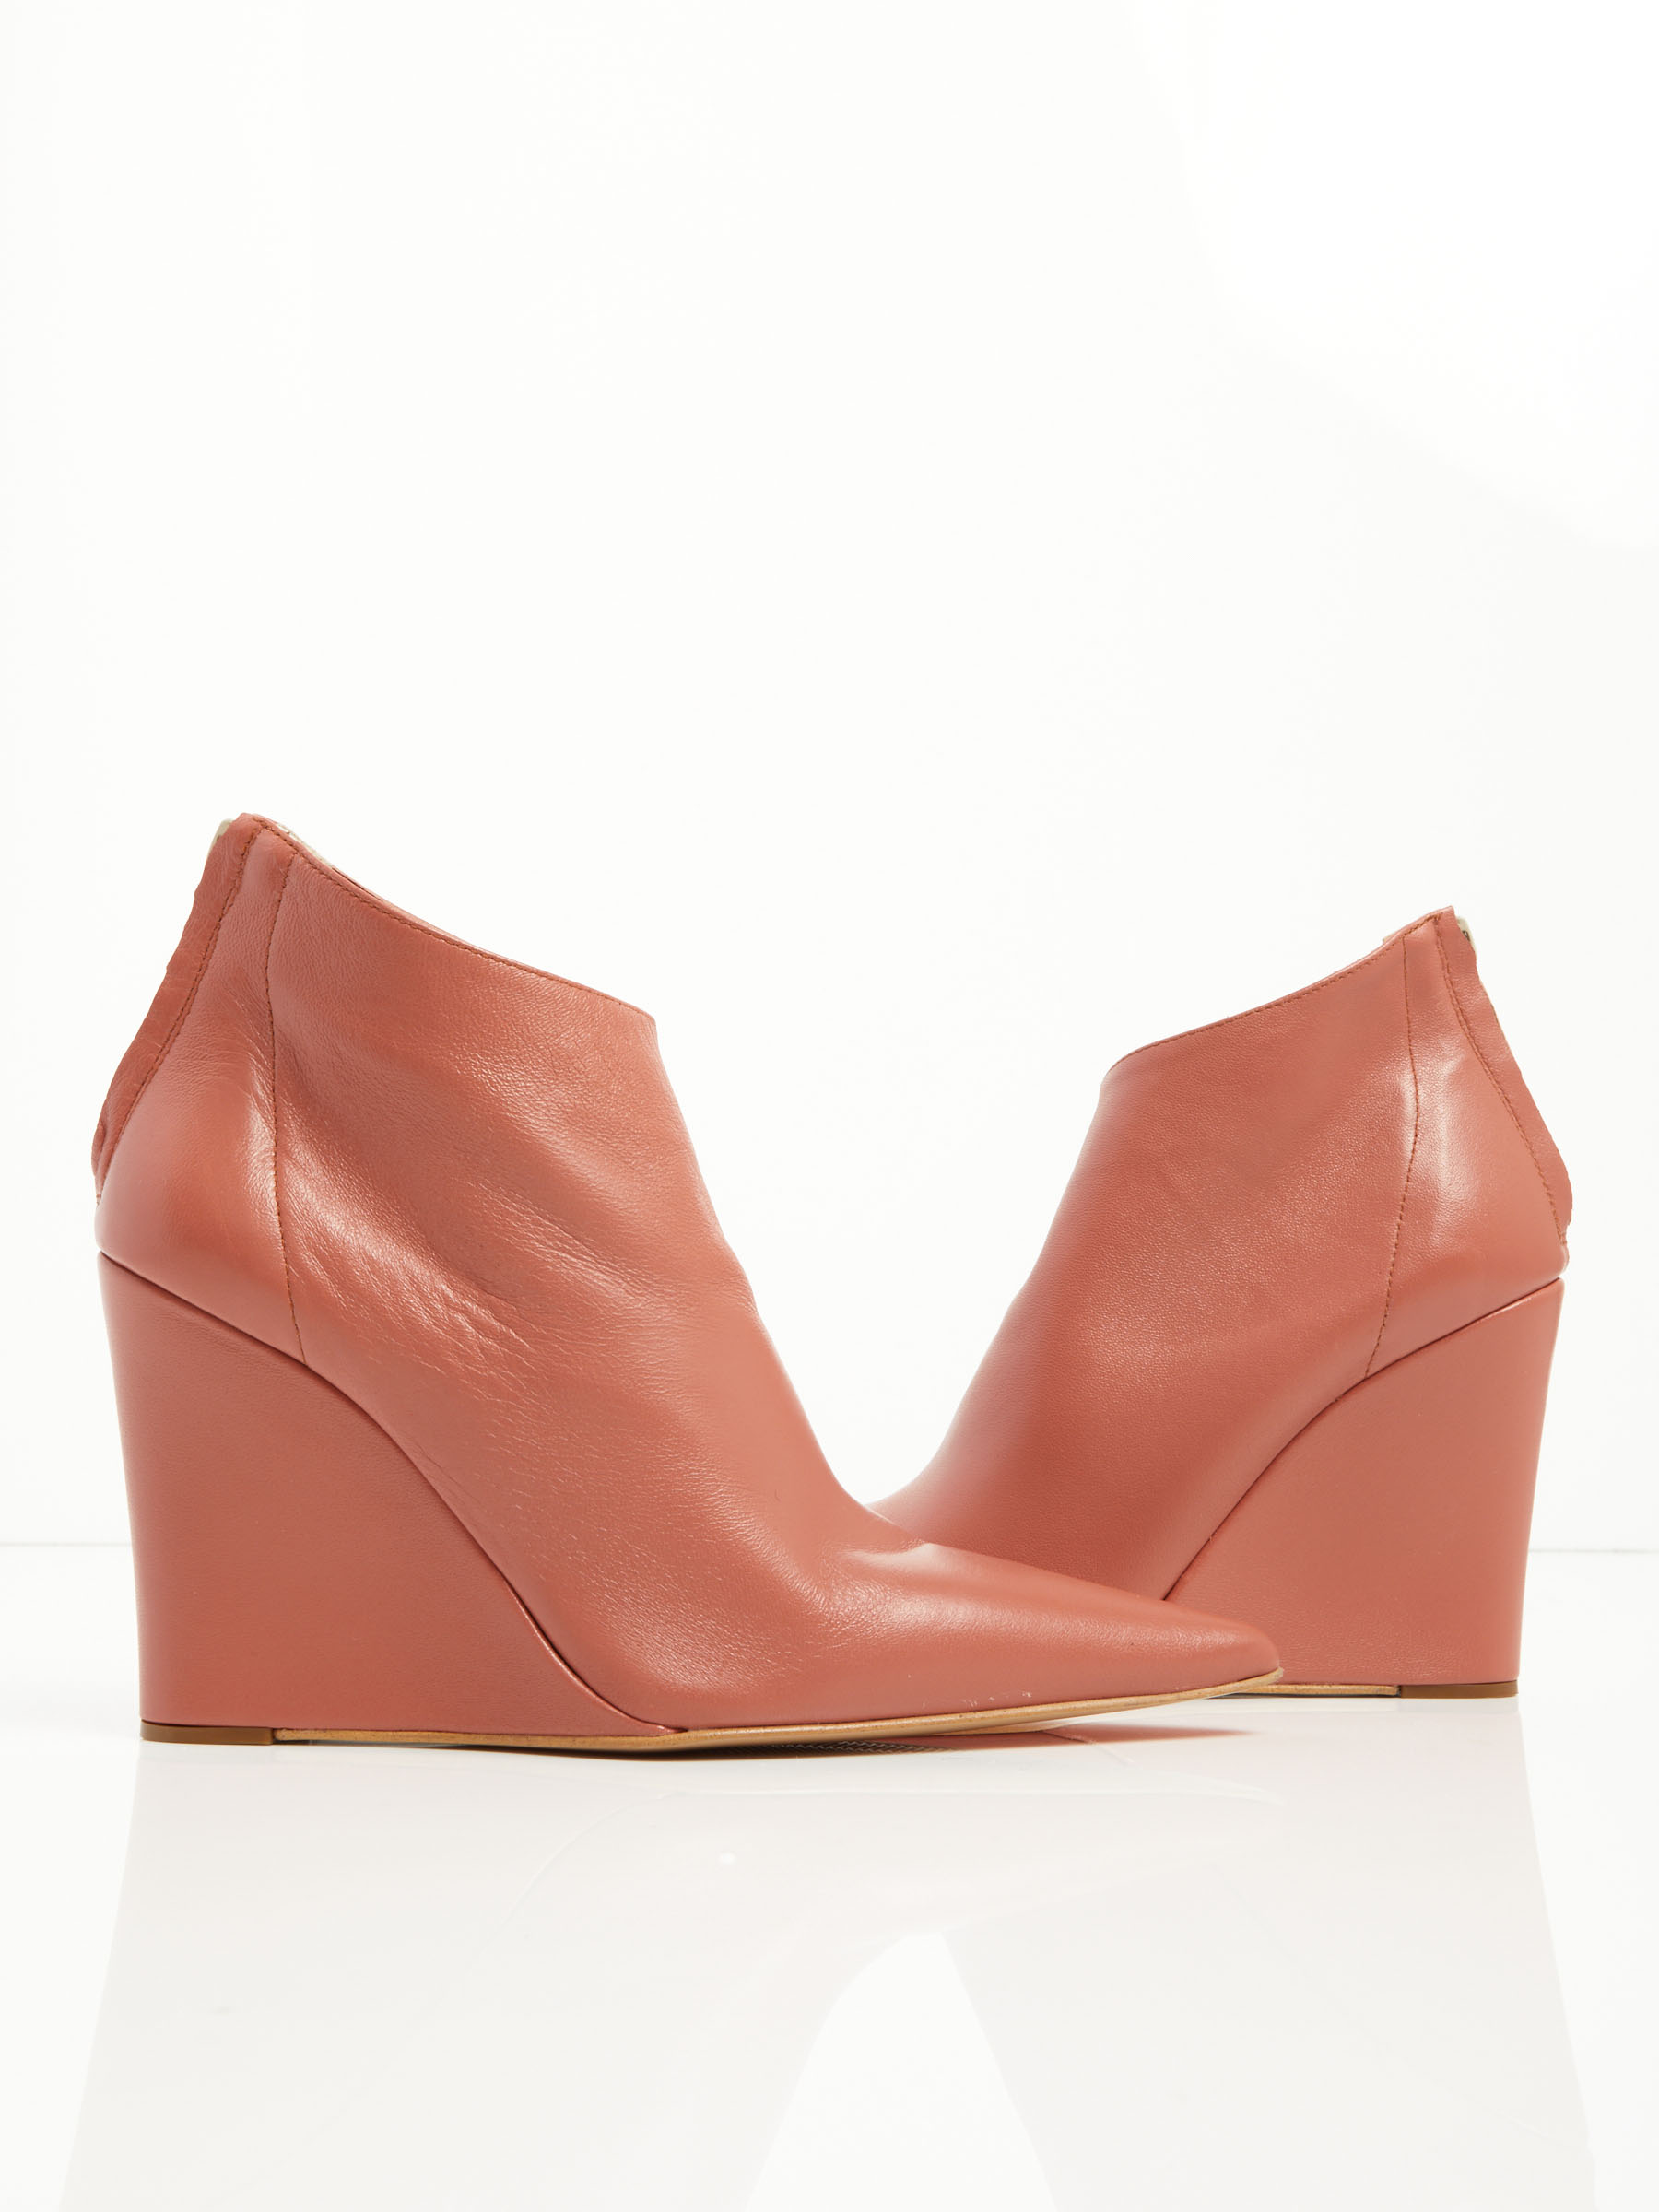 Offerte Wedge Leather Ankle Boots F0545554-0470 Economici